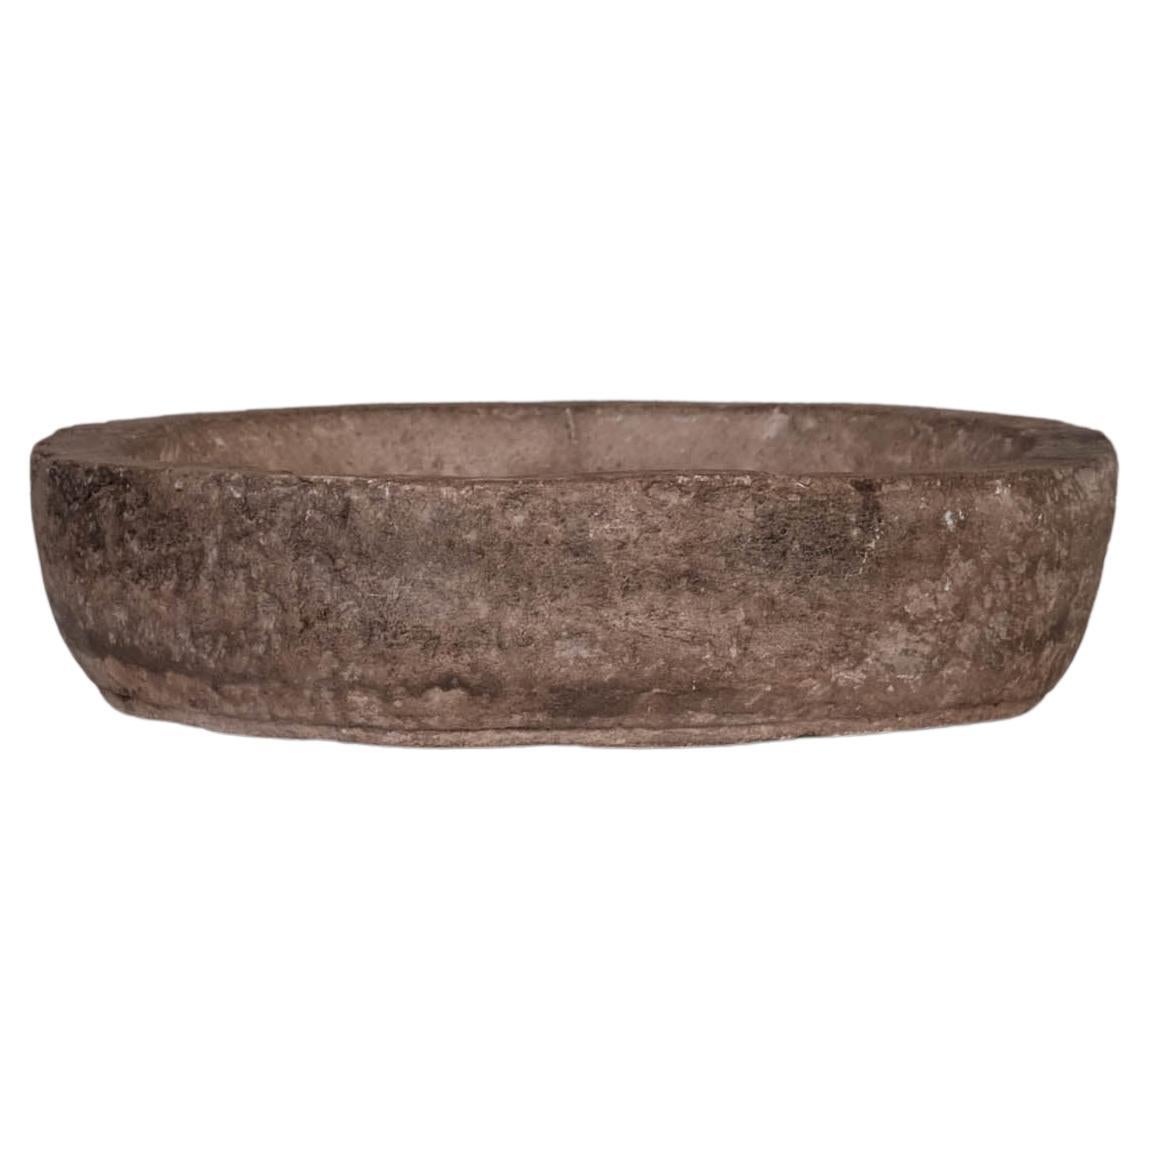 Primitive Nepalese Stone Large Bowl or Sink